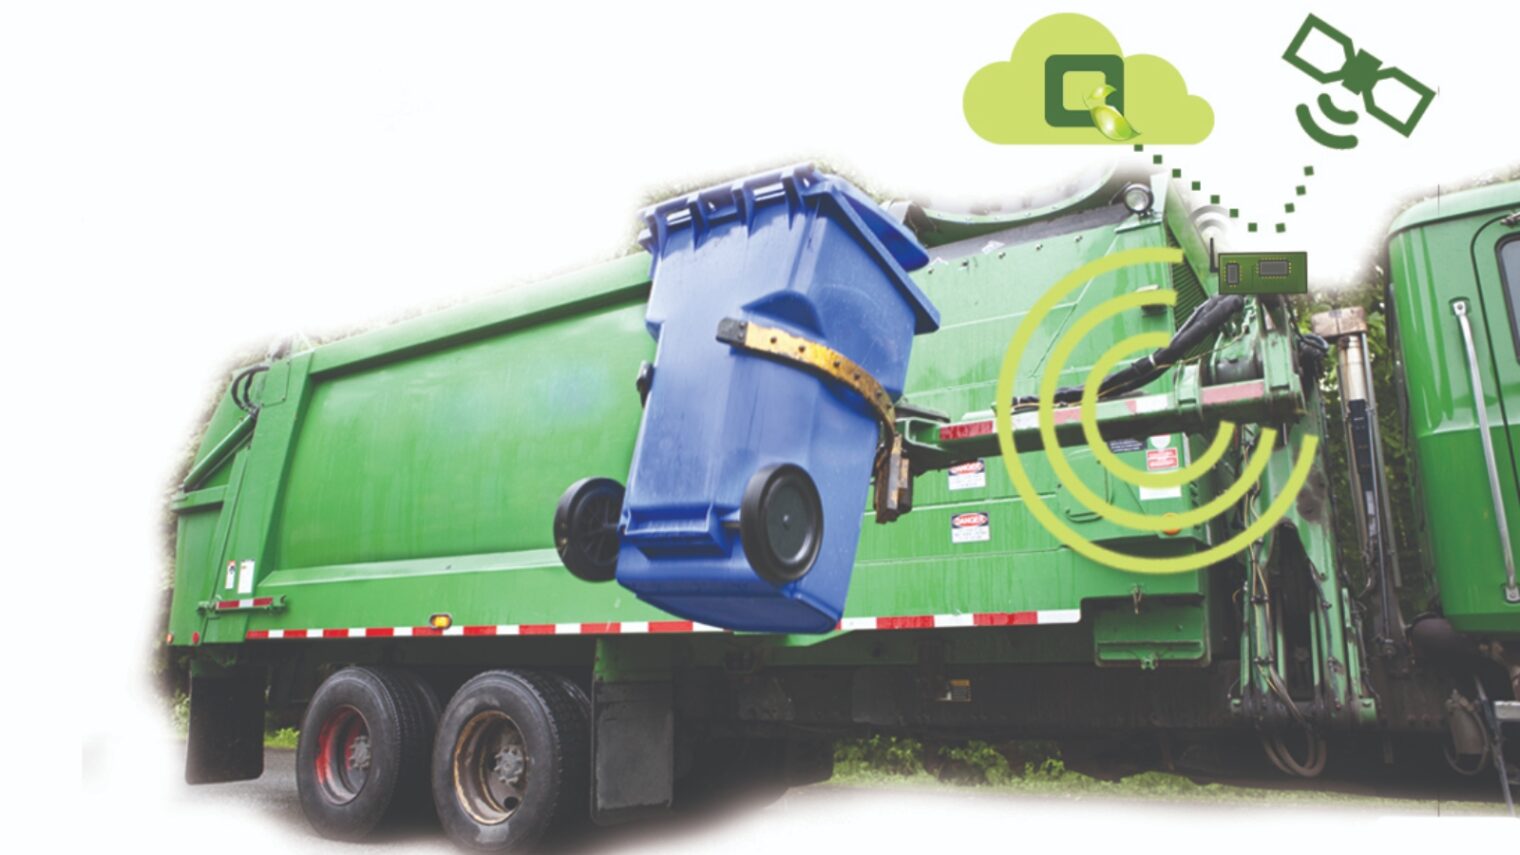 GreenQ is bringing sensors and big-data analytics to residential garbage routes. Photo: courtesy